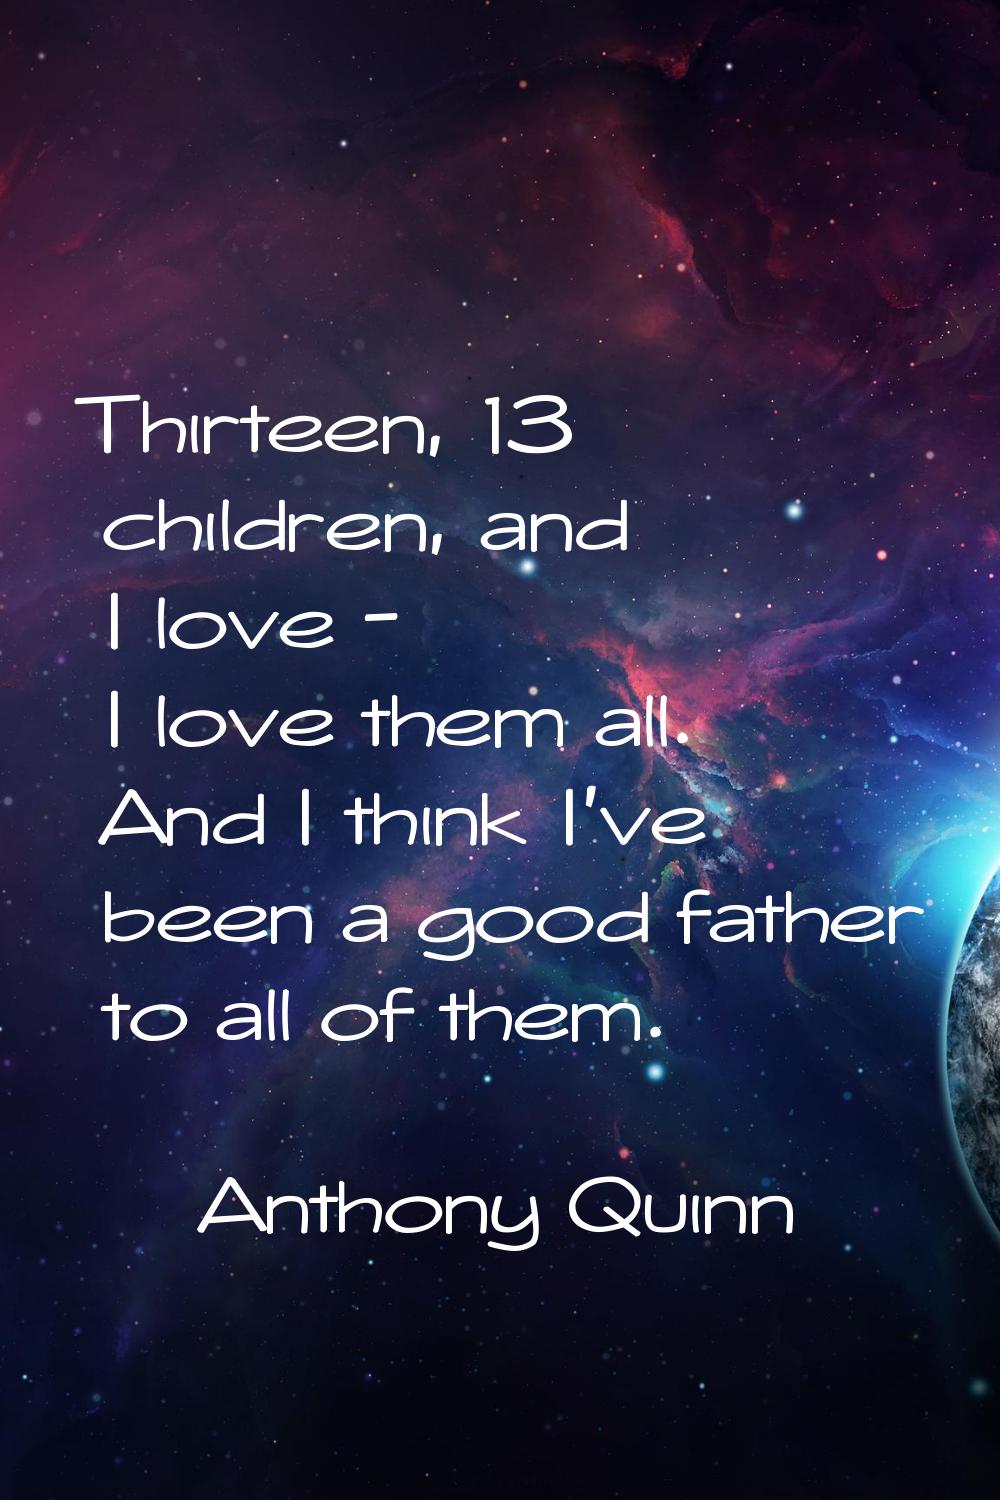 Thirteen, 13 children, and I love - I love them all. And I think I've been a good father to all of 